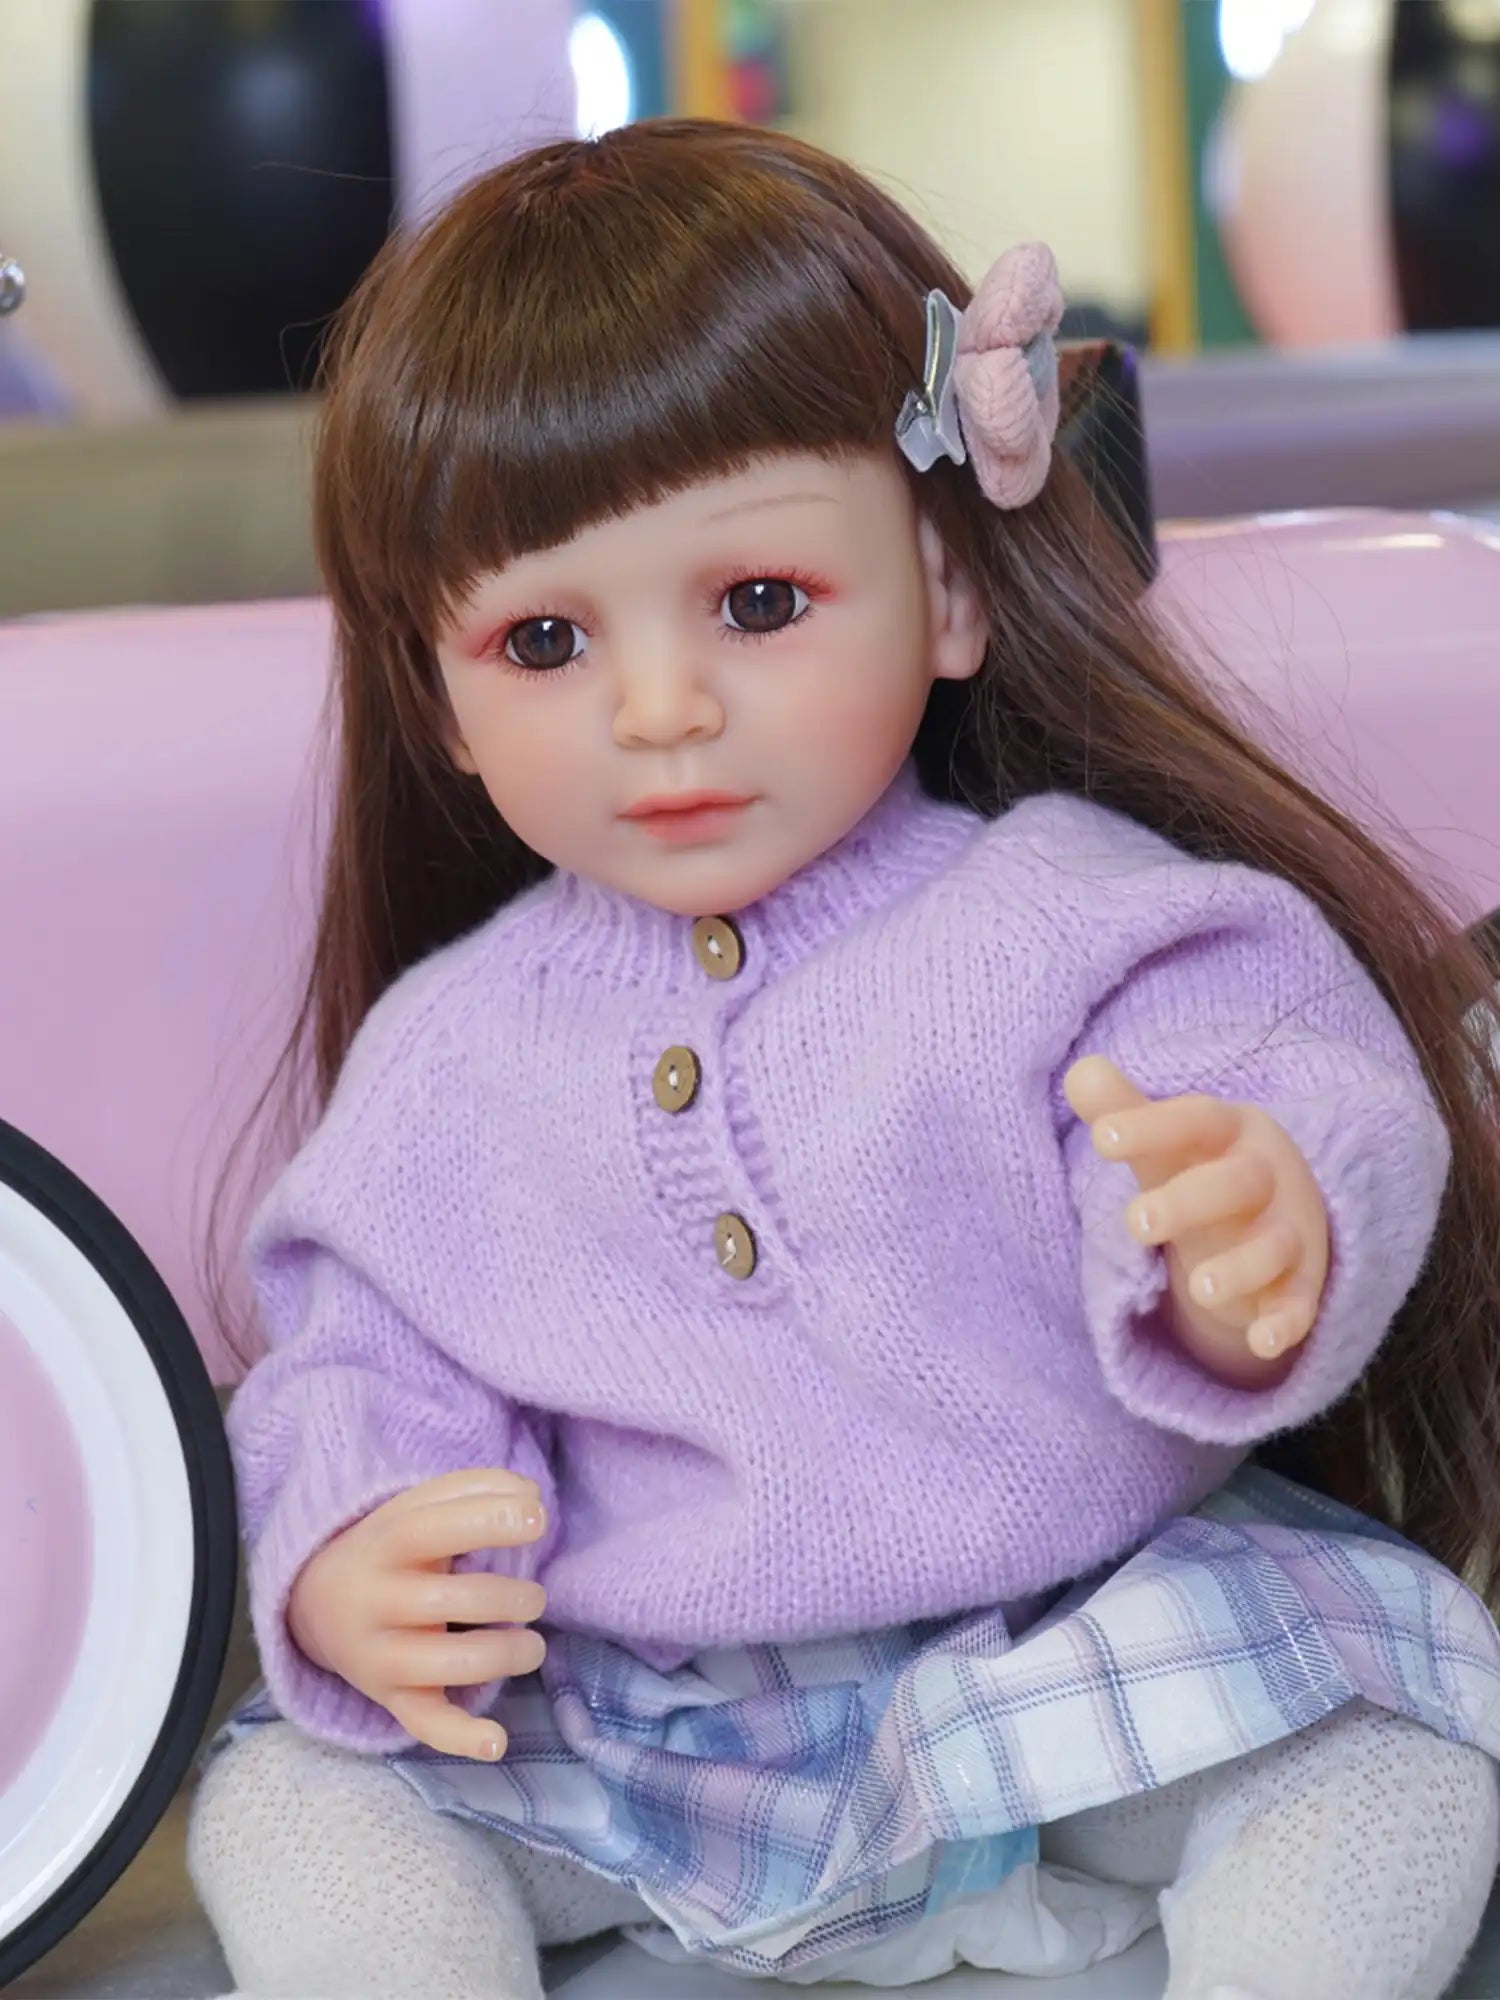 An adorable doll with lifelike features, wearing a textured purple sweater and a blue and white skirt, posing seated.